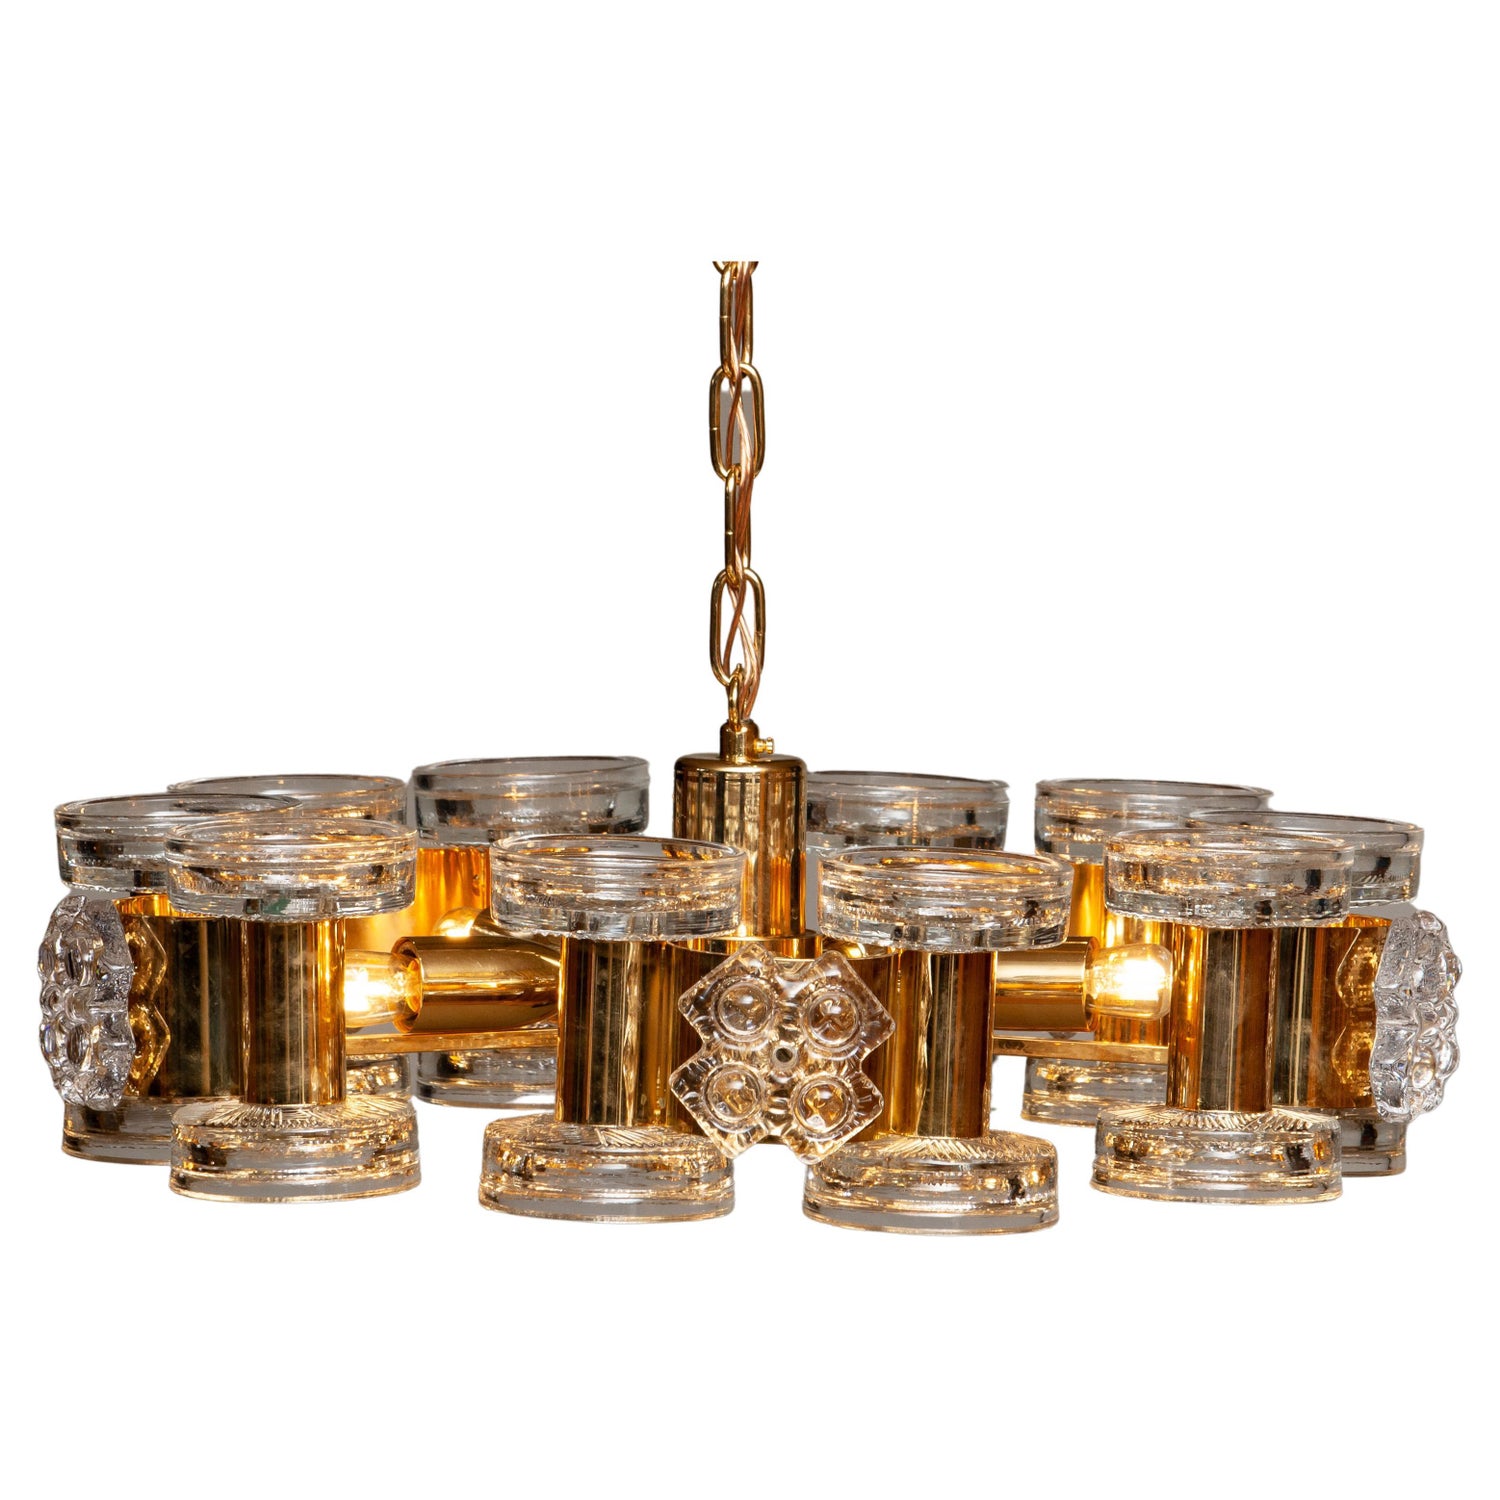 Brass and Crystal Chandelier with Both Electrical and Candles